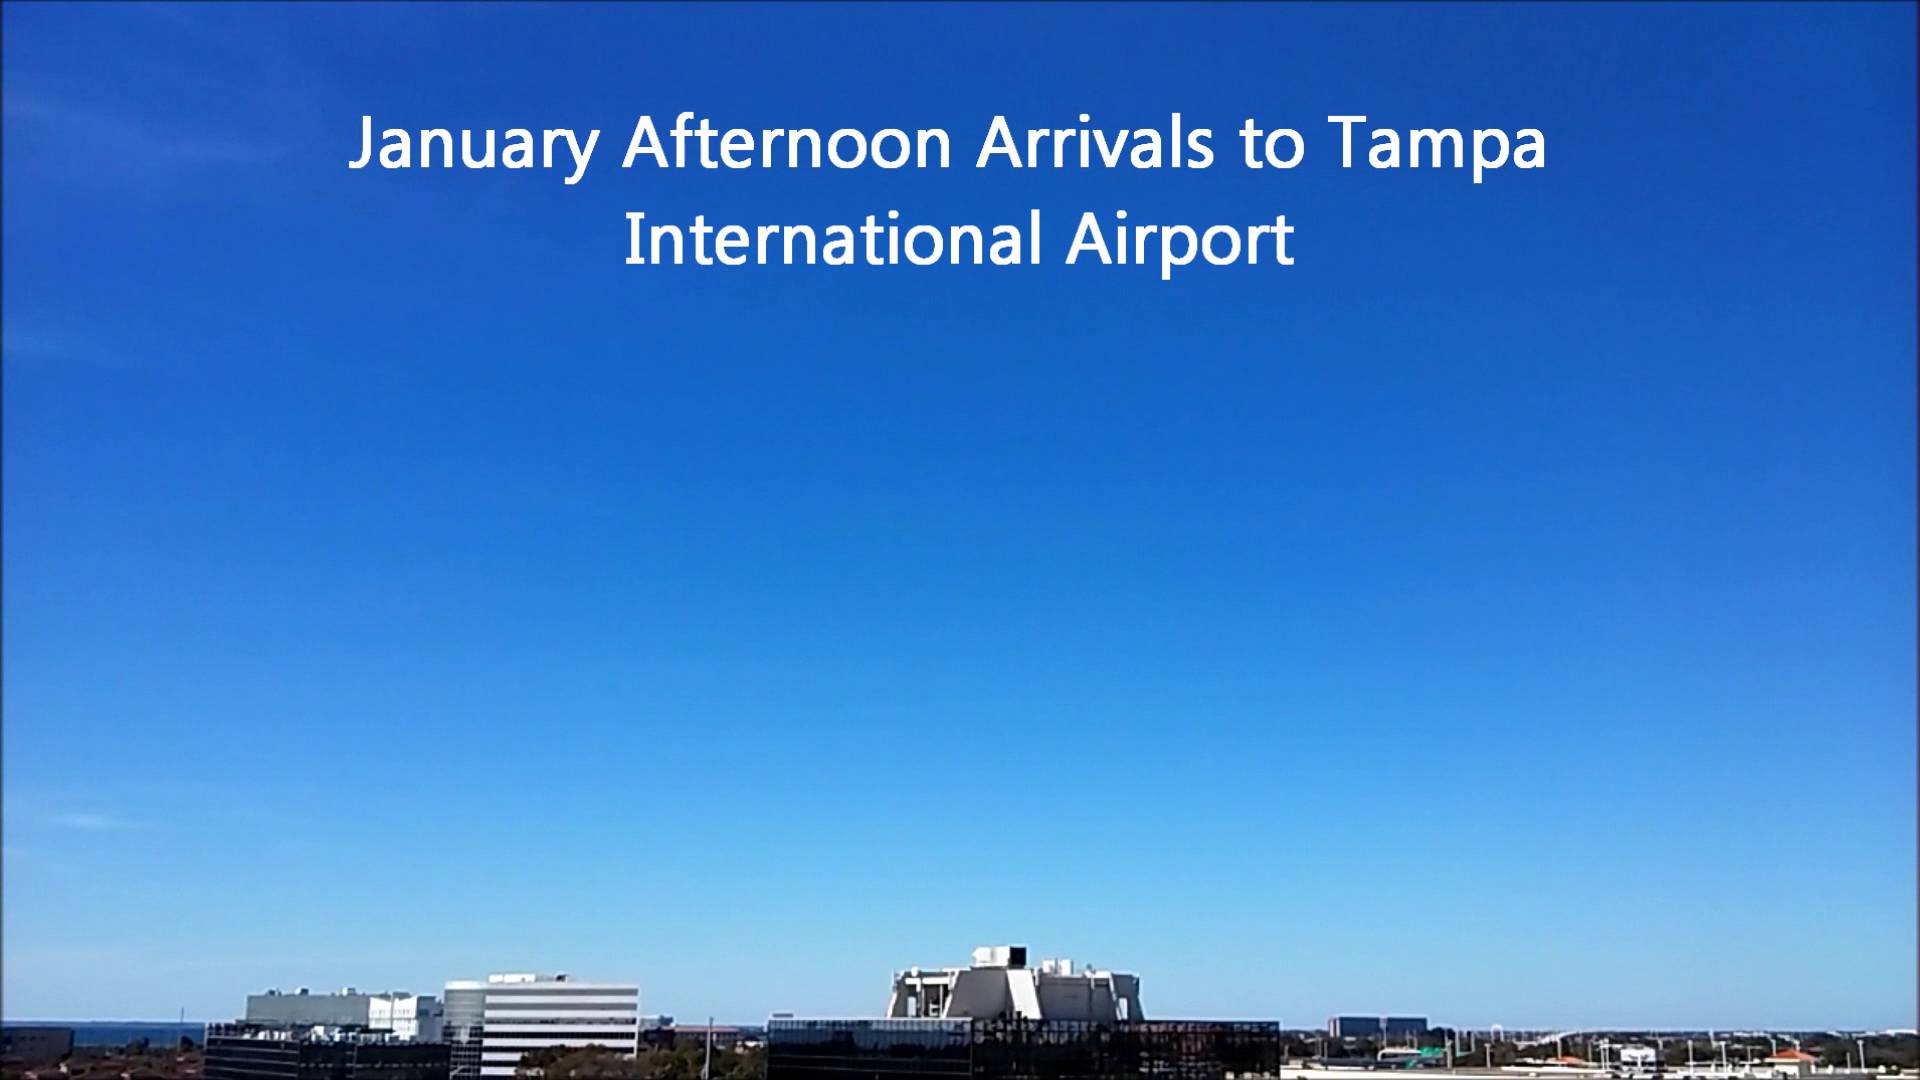 January Afternoon Arrivals to Tampa International Airport